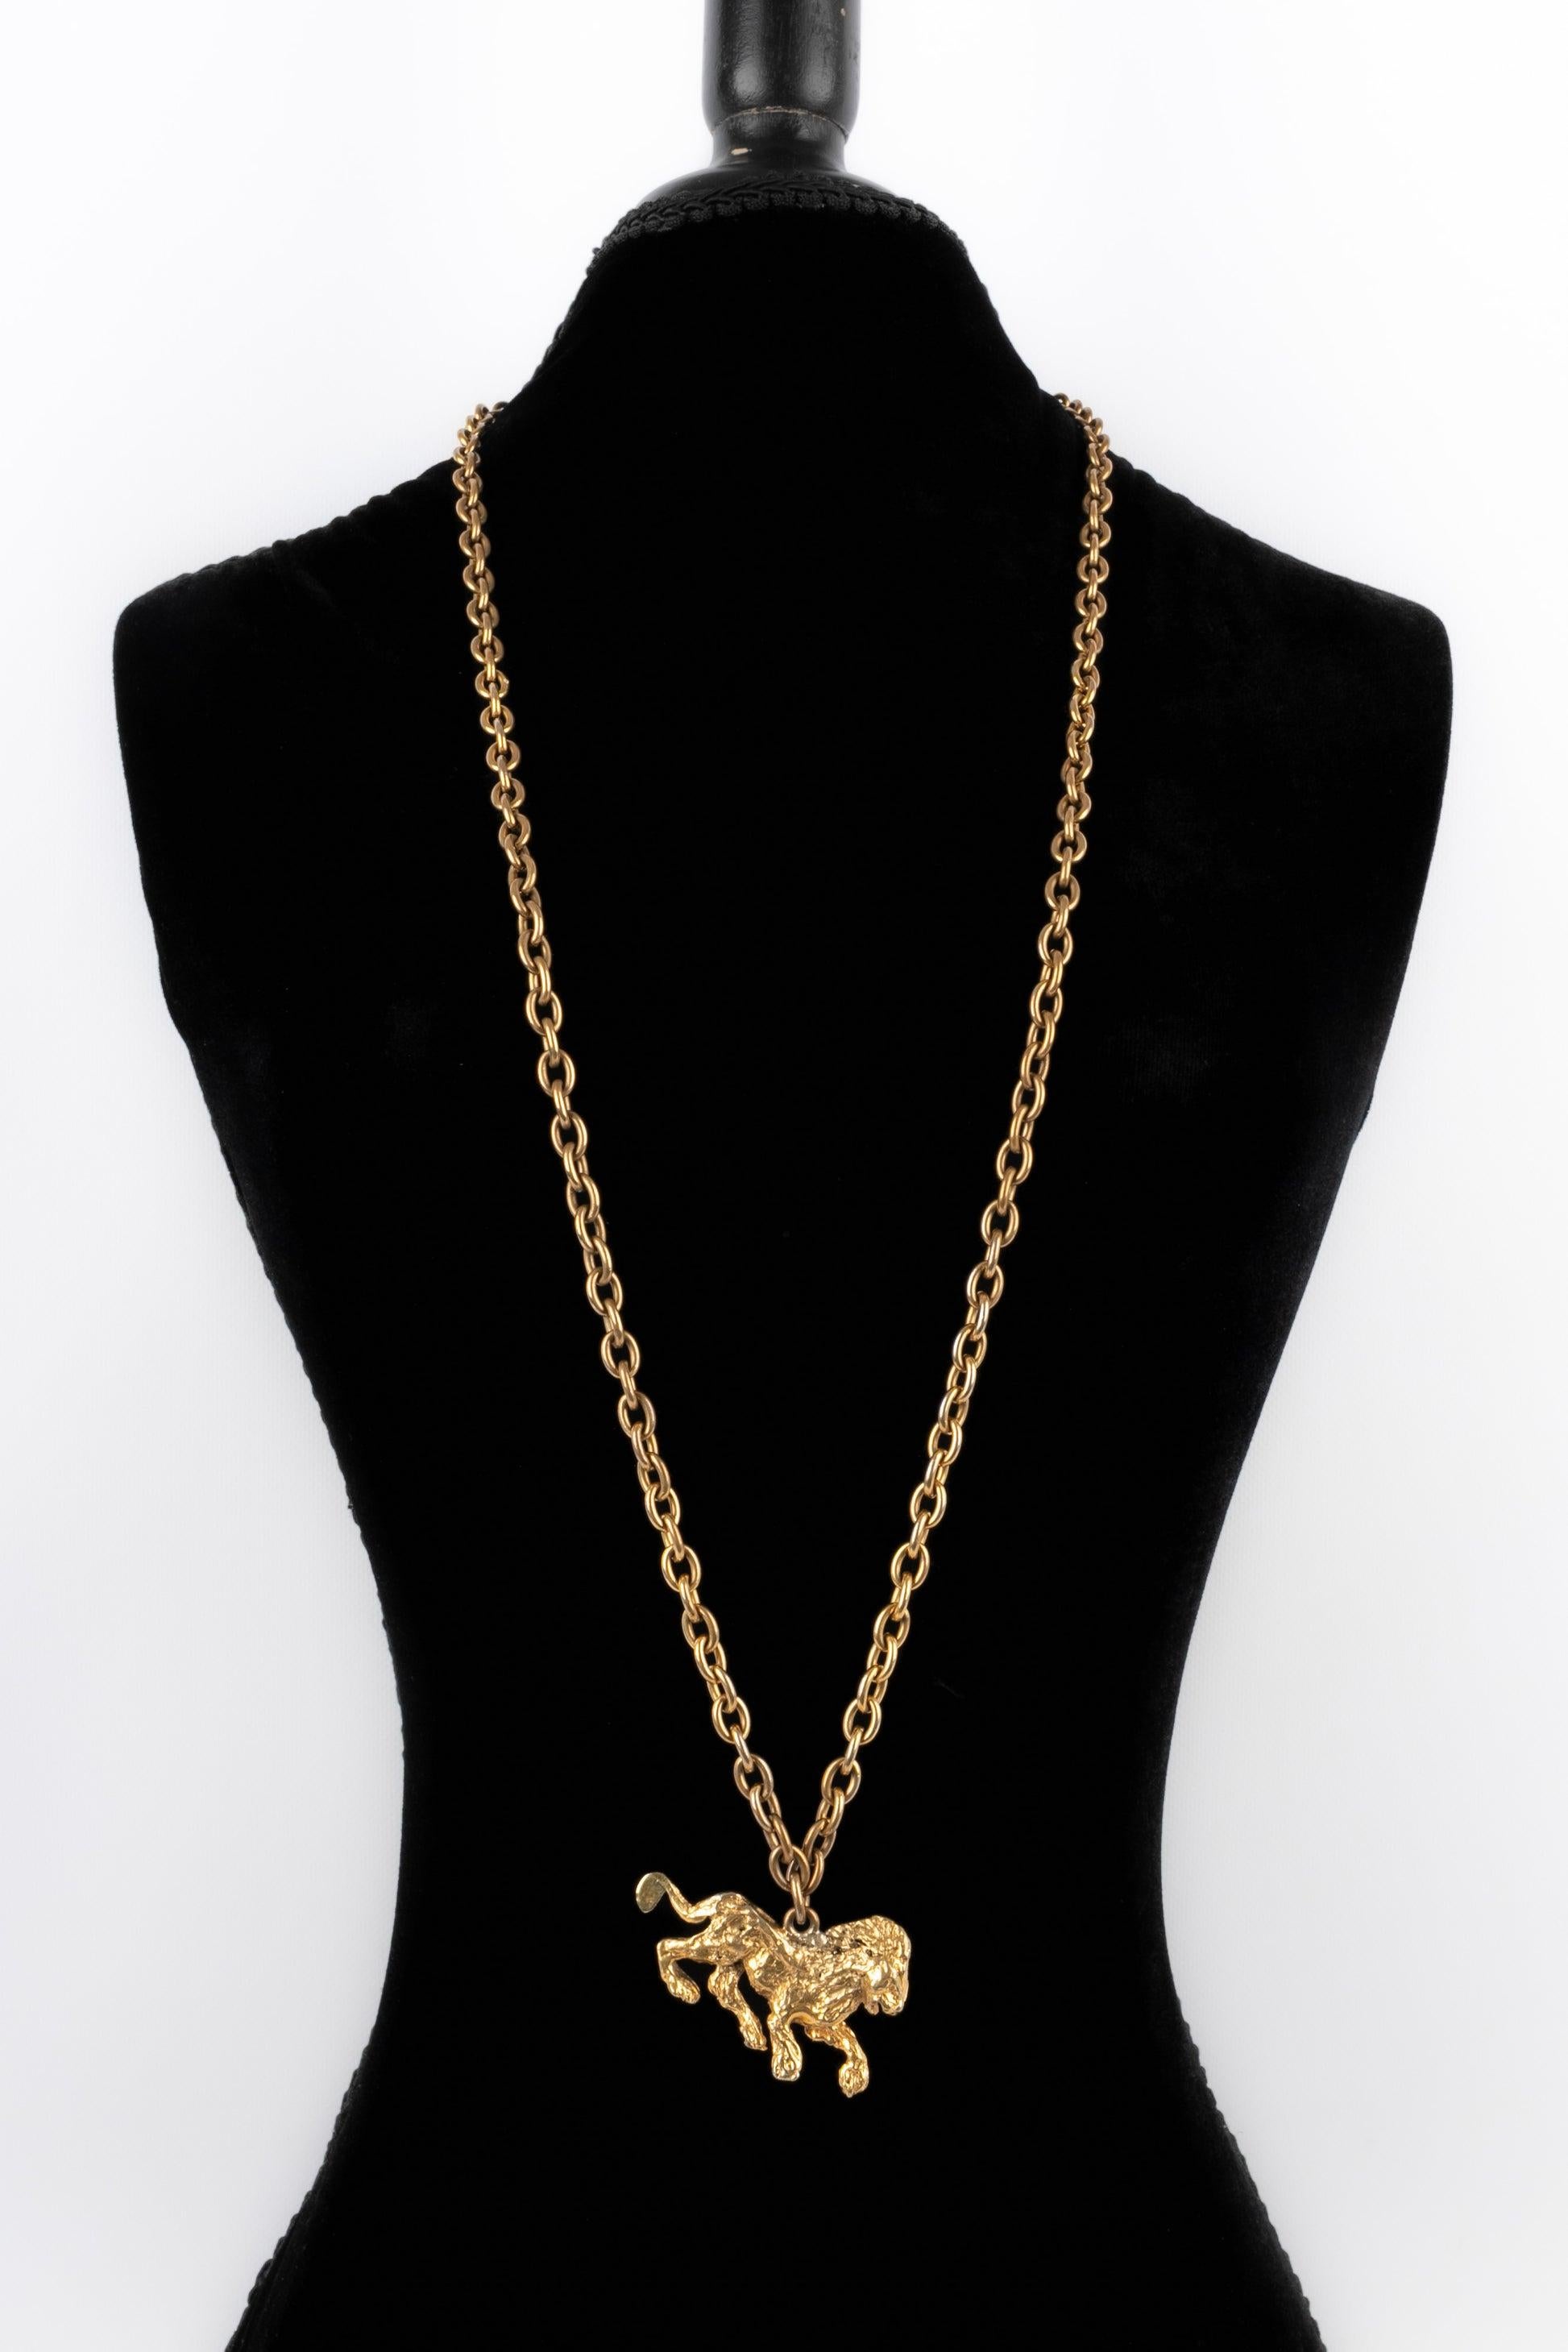 Chanel - (Made in France) Haute couture antique golden metal necklace with a lion pendant.
 
 Additional information: 
 Condition: Very good condition
 Dimensions: Length: 100 cm
 
 Seller Reference: CB282
